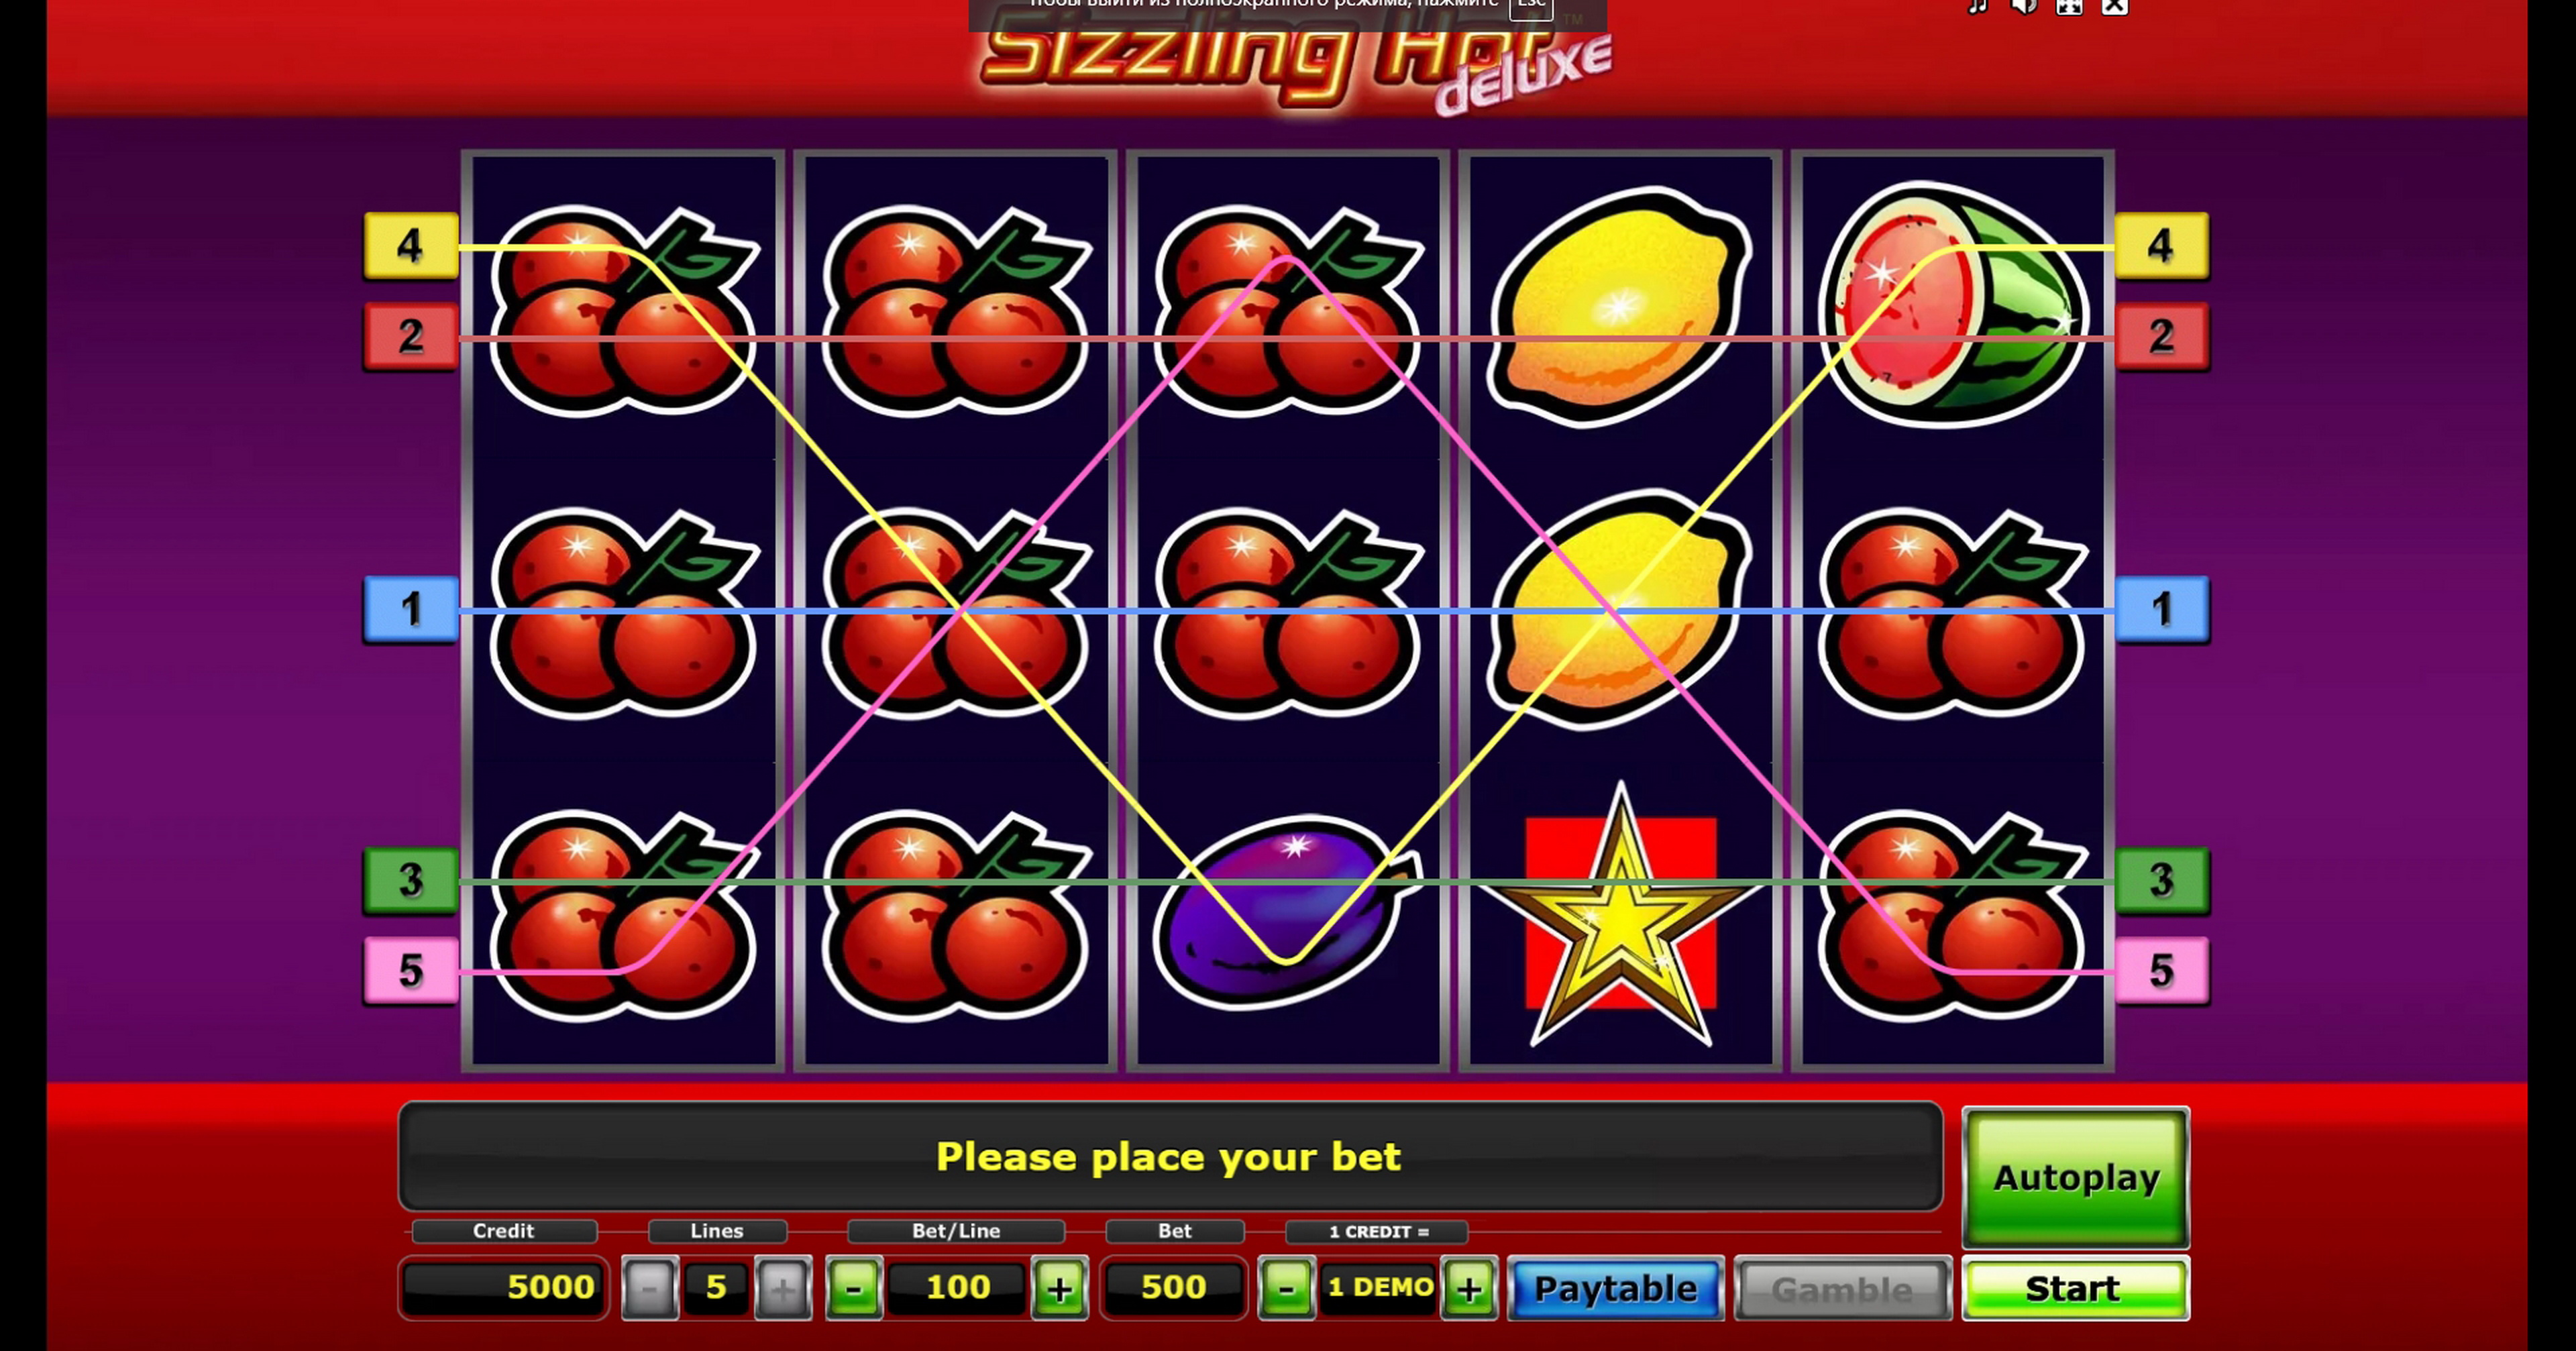 Play Sizzling Hot deluxe Free Casino Slot Game by Greentube